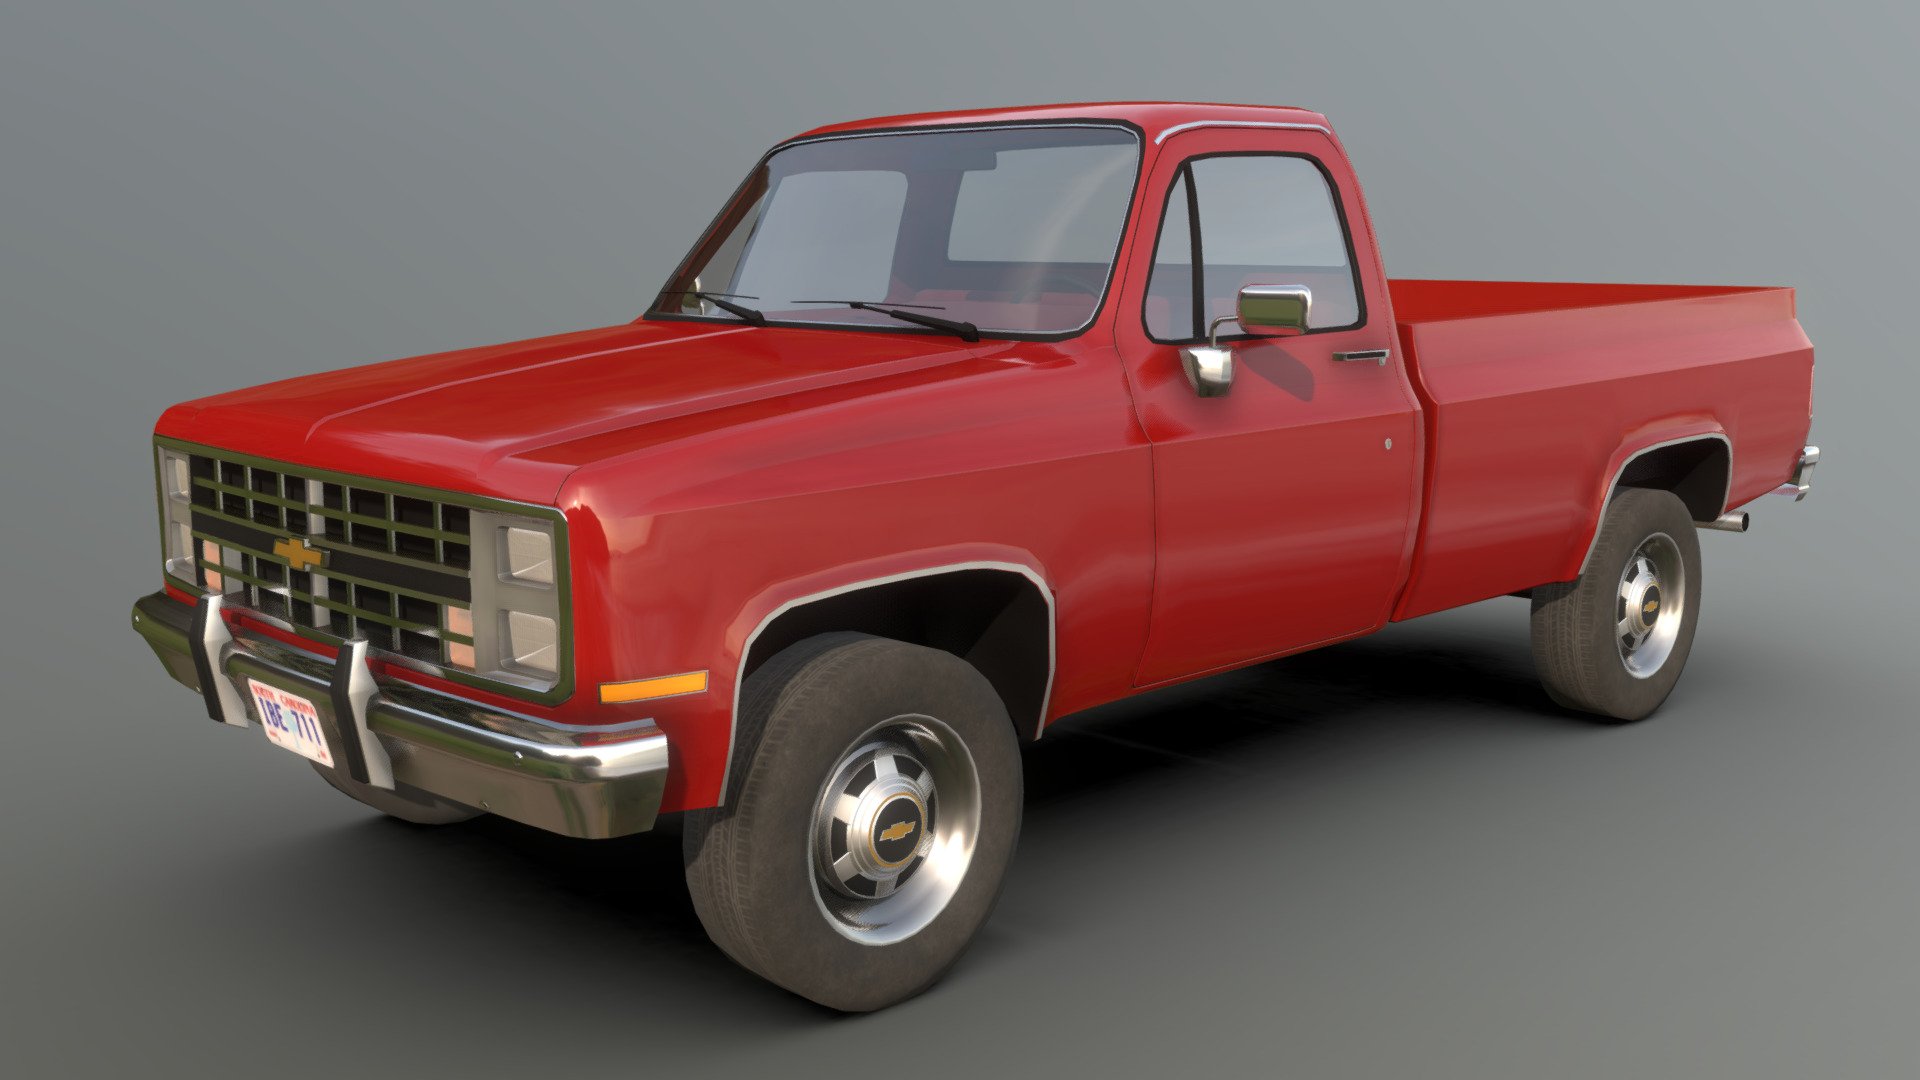 Mid-poly model of a later model 1973-1987 Chevy squarebody single cab pickup. Steel wheels kindly provided by @EzoYEAHH, the rest is scratch modelled by me. 

Exterior - 35,114 tris

Interior - 10,956 tris

Rims/Tires - 25,096 tris (including hubcaps)

Total - 71,166 - 1984 Chevrolet C10 - 3D model by n1ck (@captainpisslord) 3d model